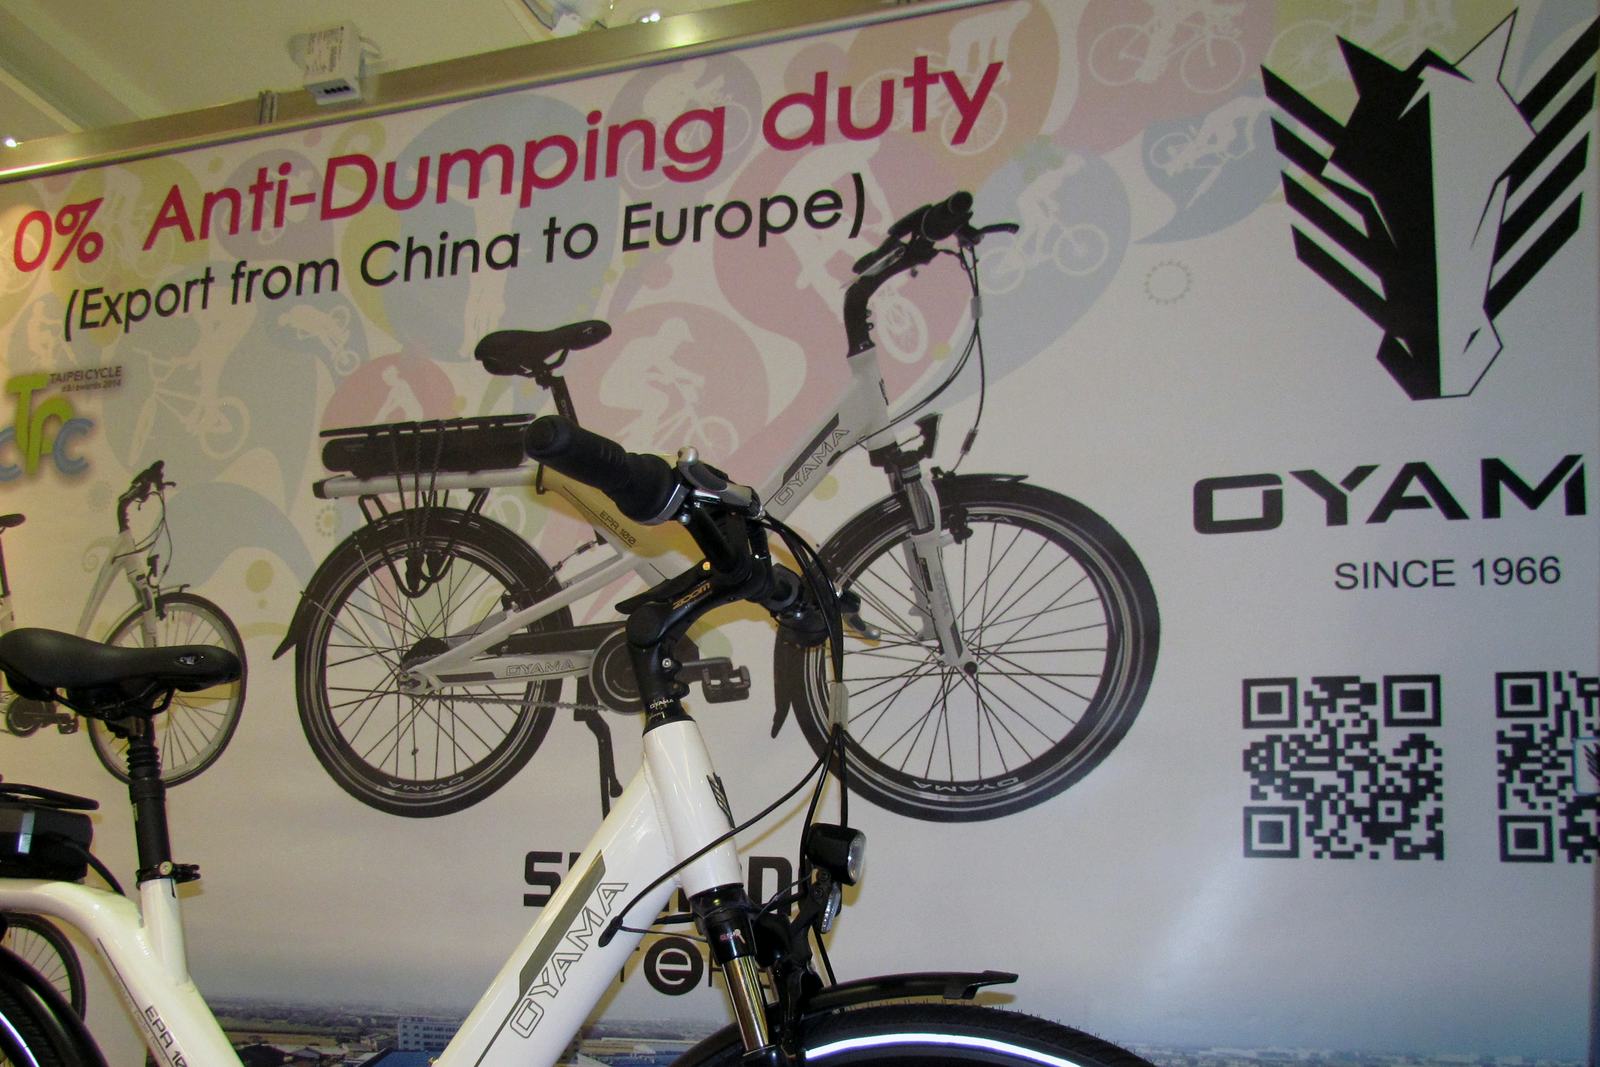 Bike manufacturers operating in China like Oyama that are exempted from anti-dumping duties were presenting their competitive advantages at Taichung Bike Week. - Photo Bike Europe